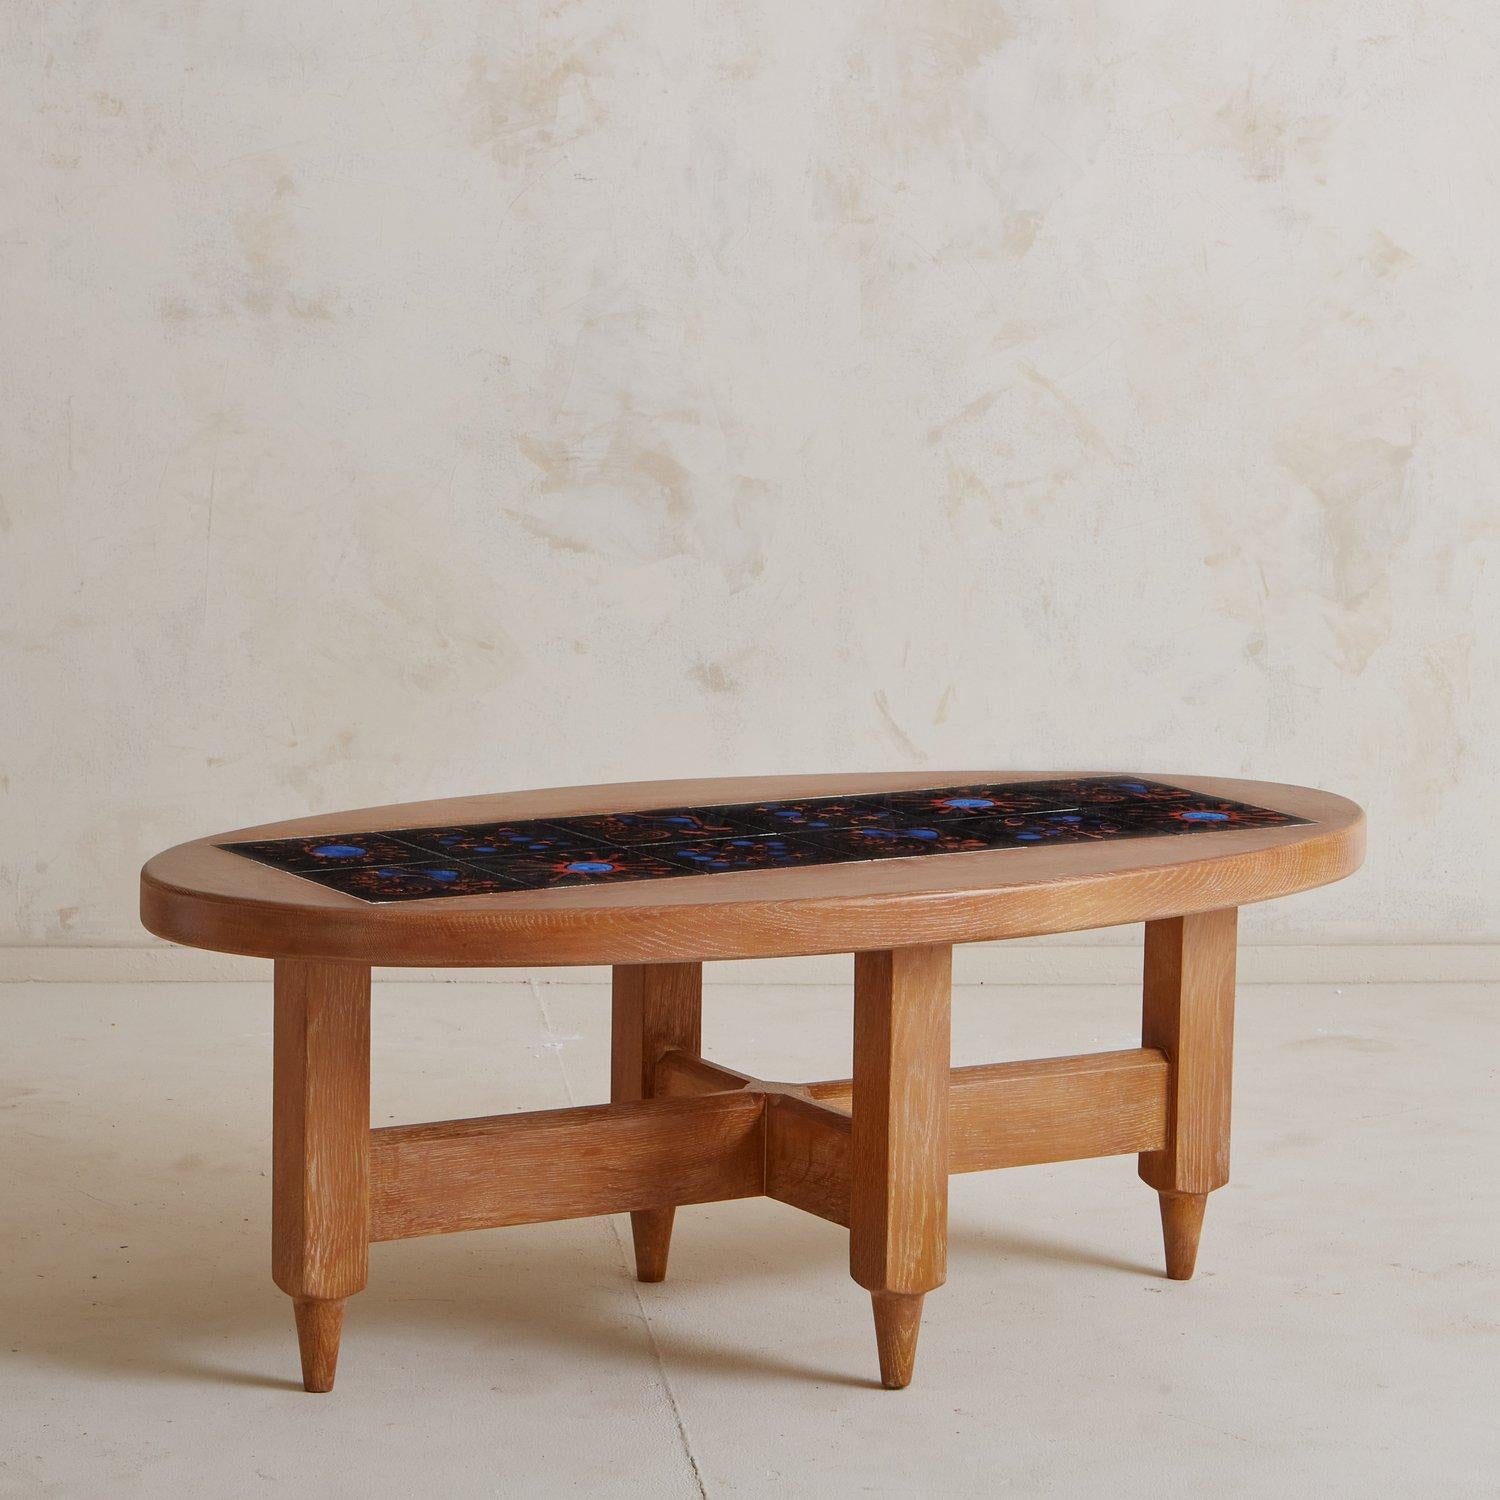 A Mid Century French coffee table by Guillerme et Chambron constructed with oak. This timeless piece has an oval top with a black ceramic tile inlay featuring blue and red abstract patterns. We love the sculptural carved base and X-support.